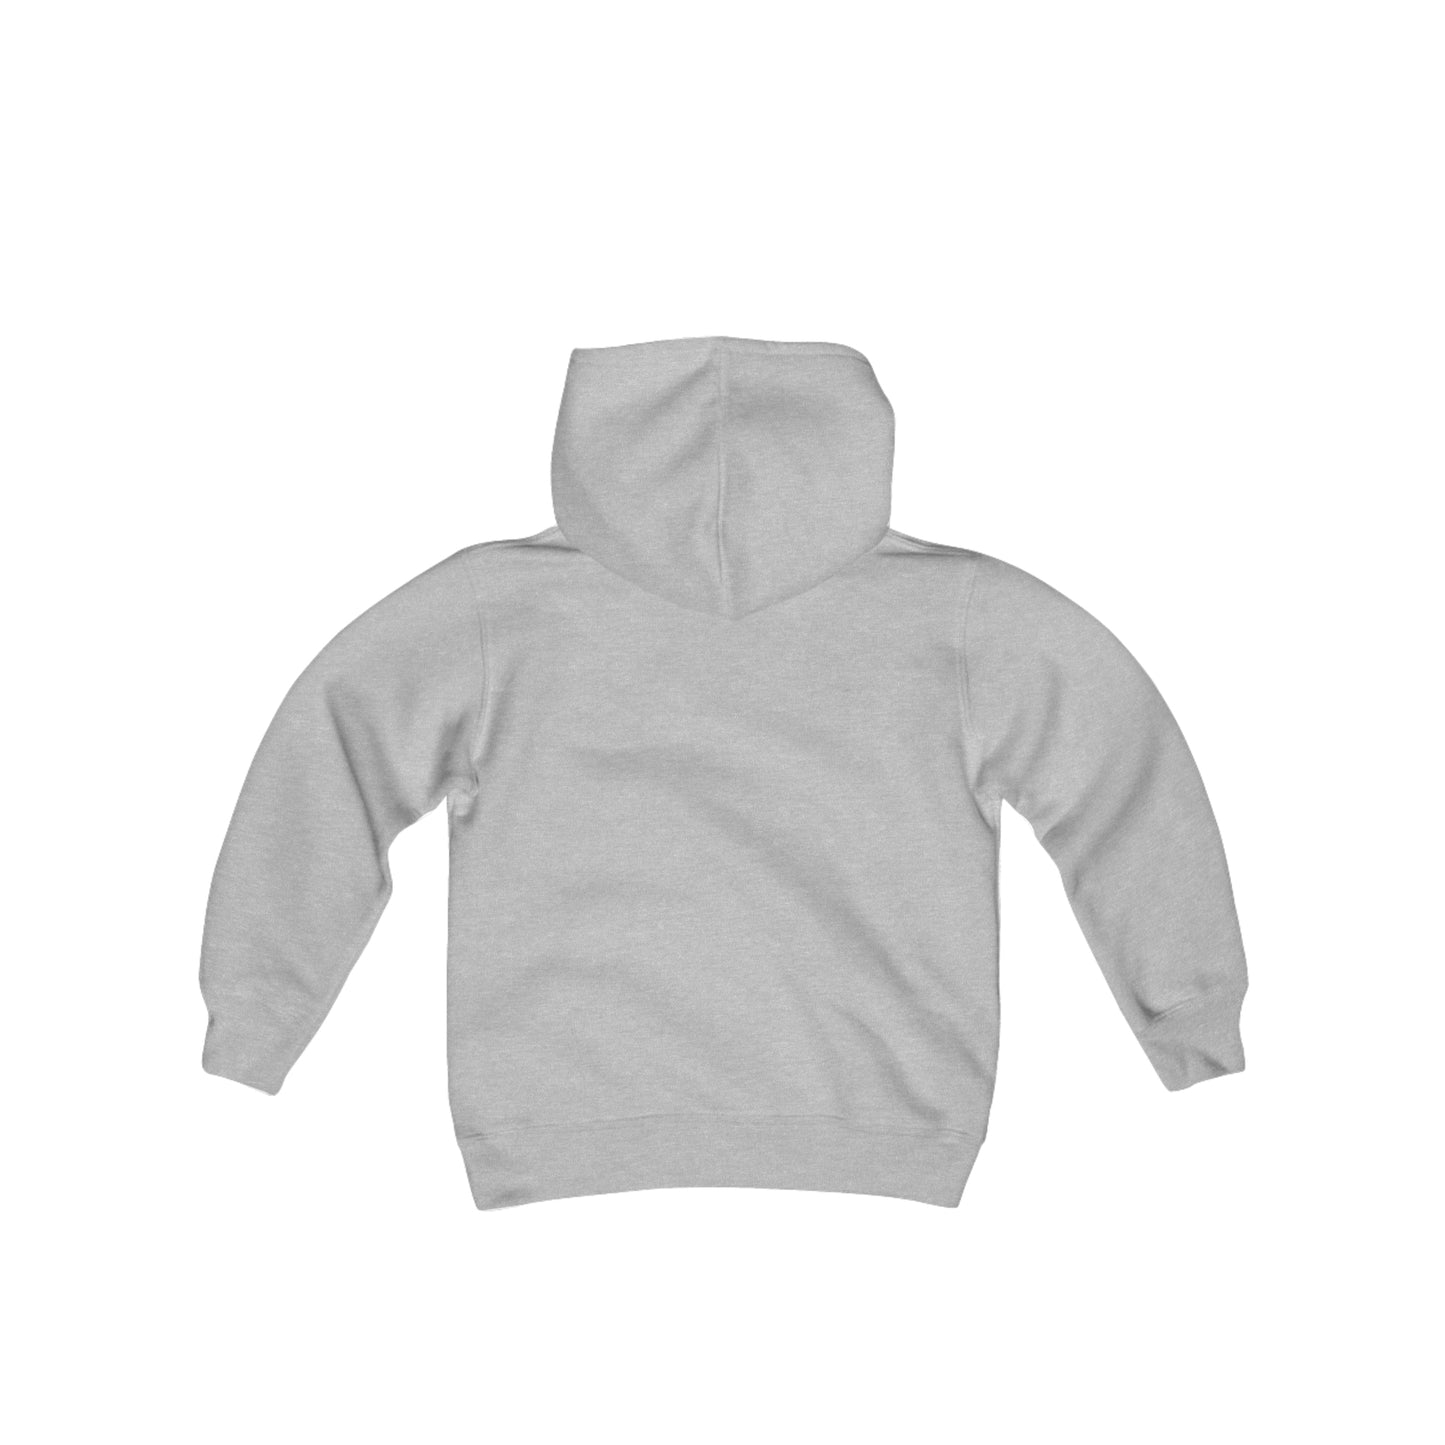 OnlyRCs - Youth Sunset Fade Buggy Heavy Blend Hooded Sweatshirt - Series 1